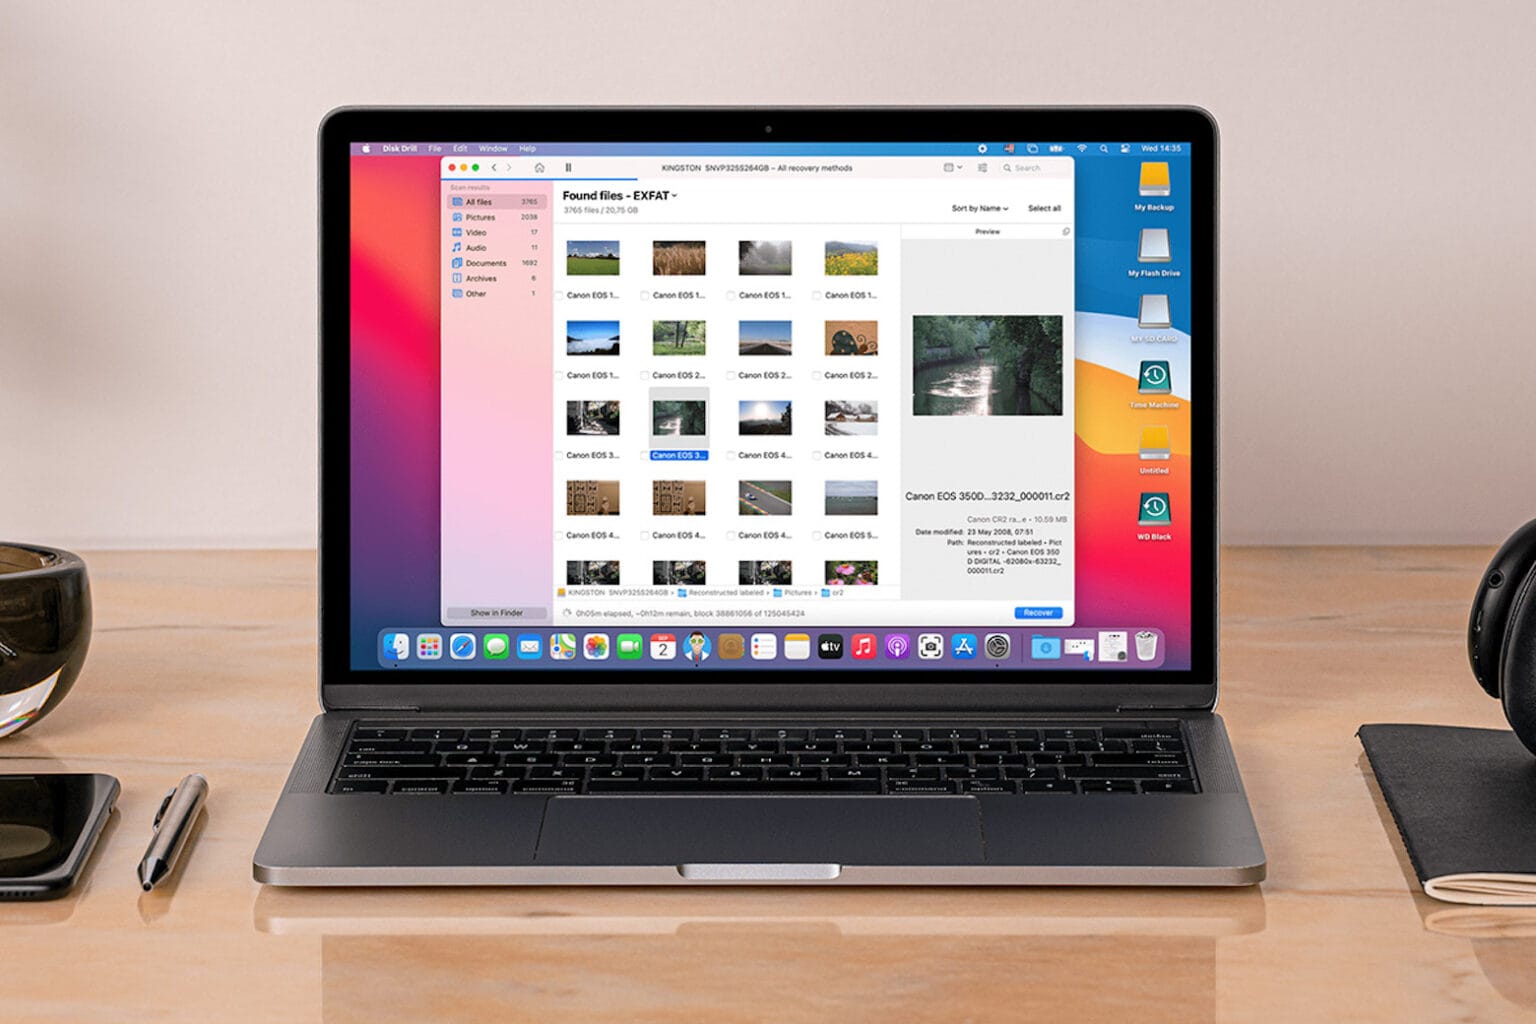 This recovery system for Mac will protect you from data loss